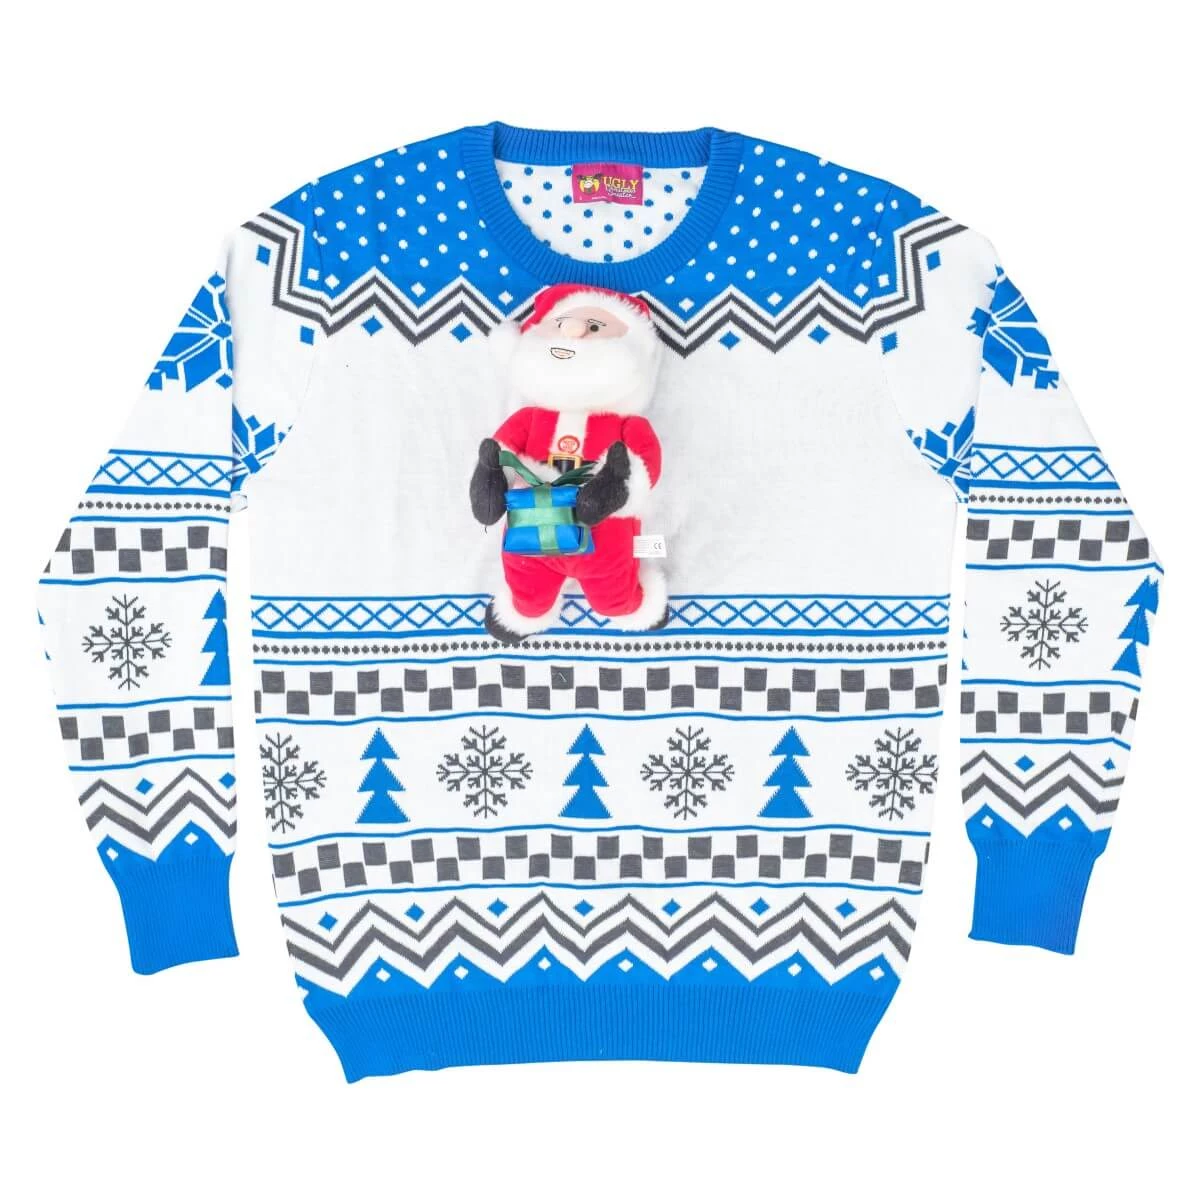 Tis the Season for the Ugly Christmas Sweater